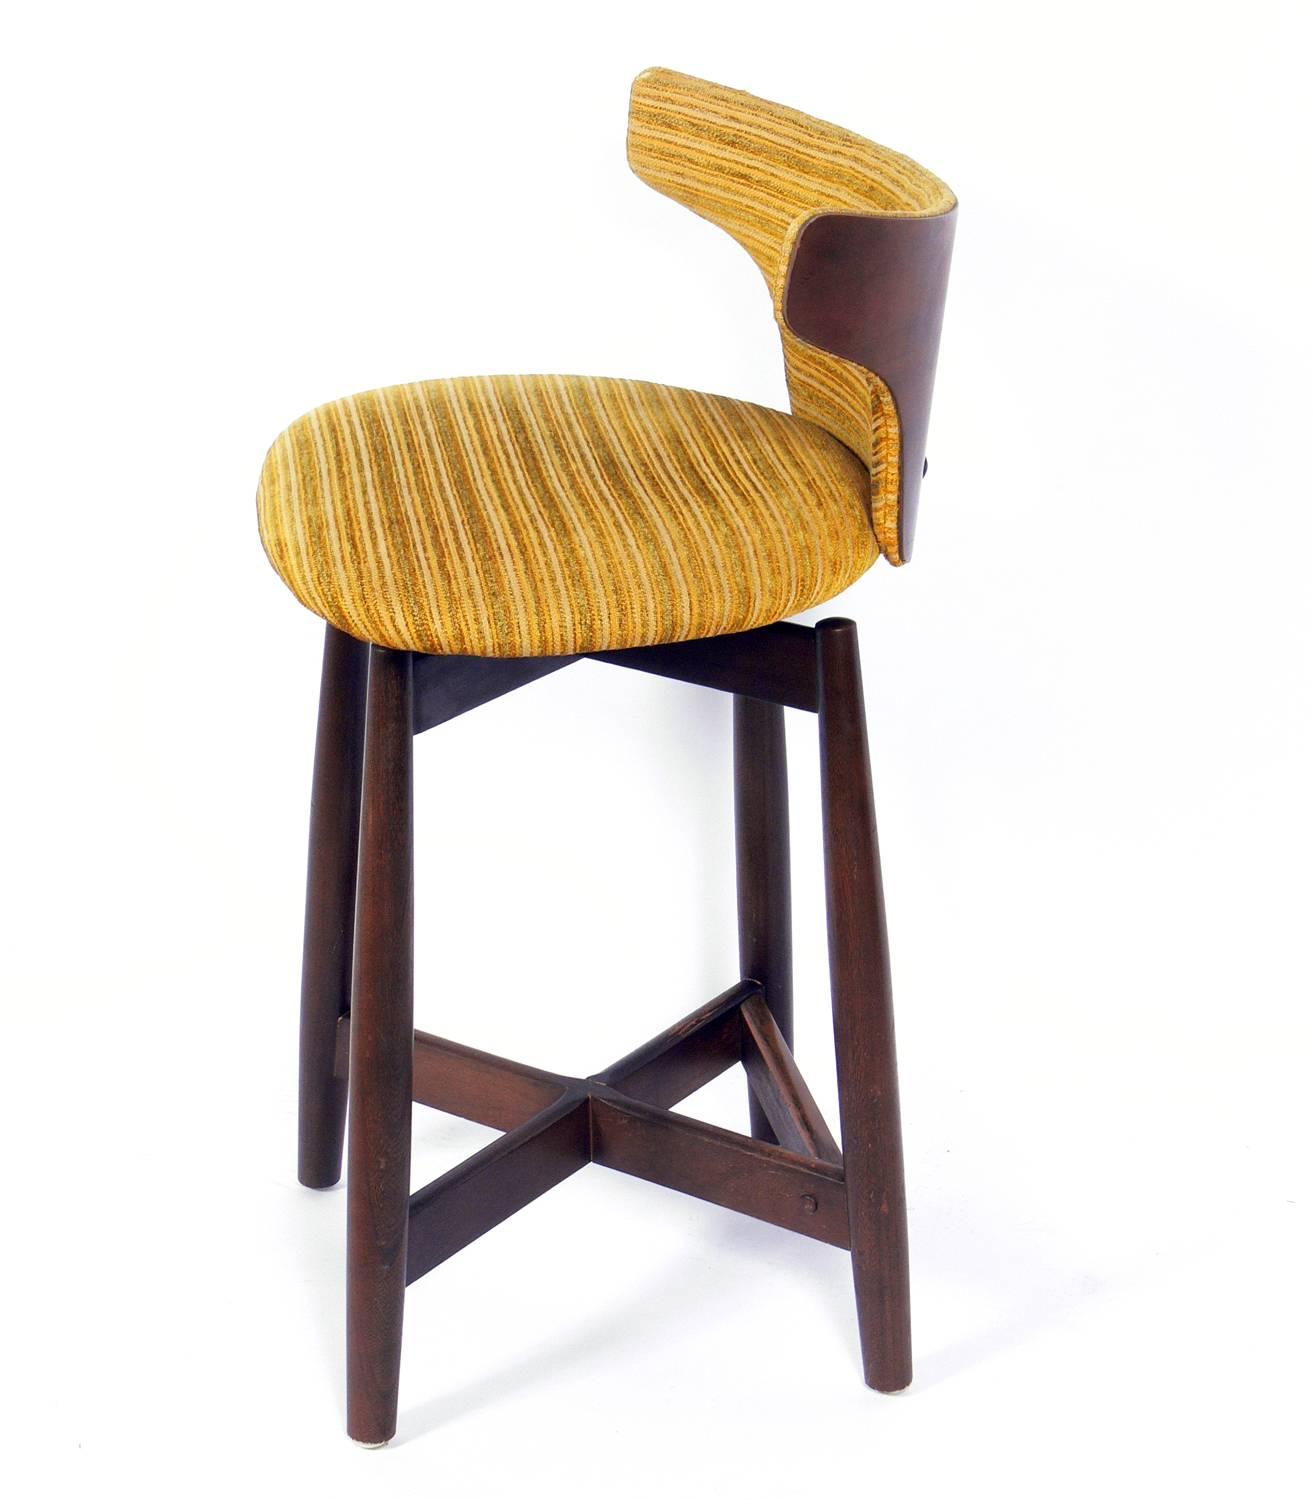 Set of three curvaceous low slung walnut modern bar stools, probably Italian, circa 1950s. We have a total of five of these bar stools available. The price noted below is for three stools. They are currently being refinished and reupholstered. They